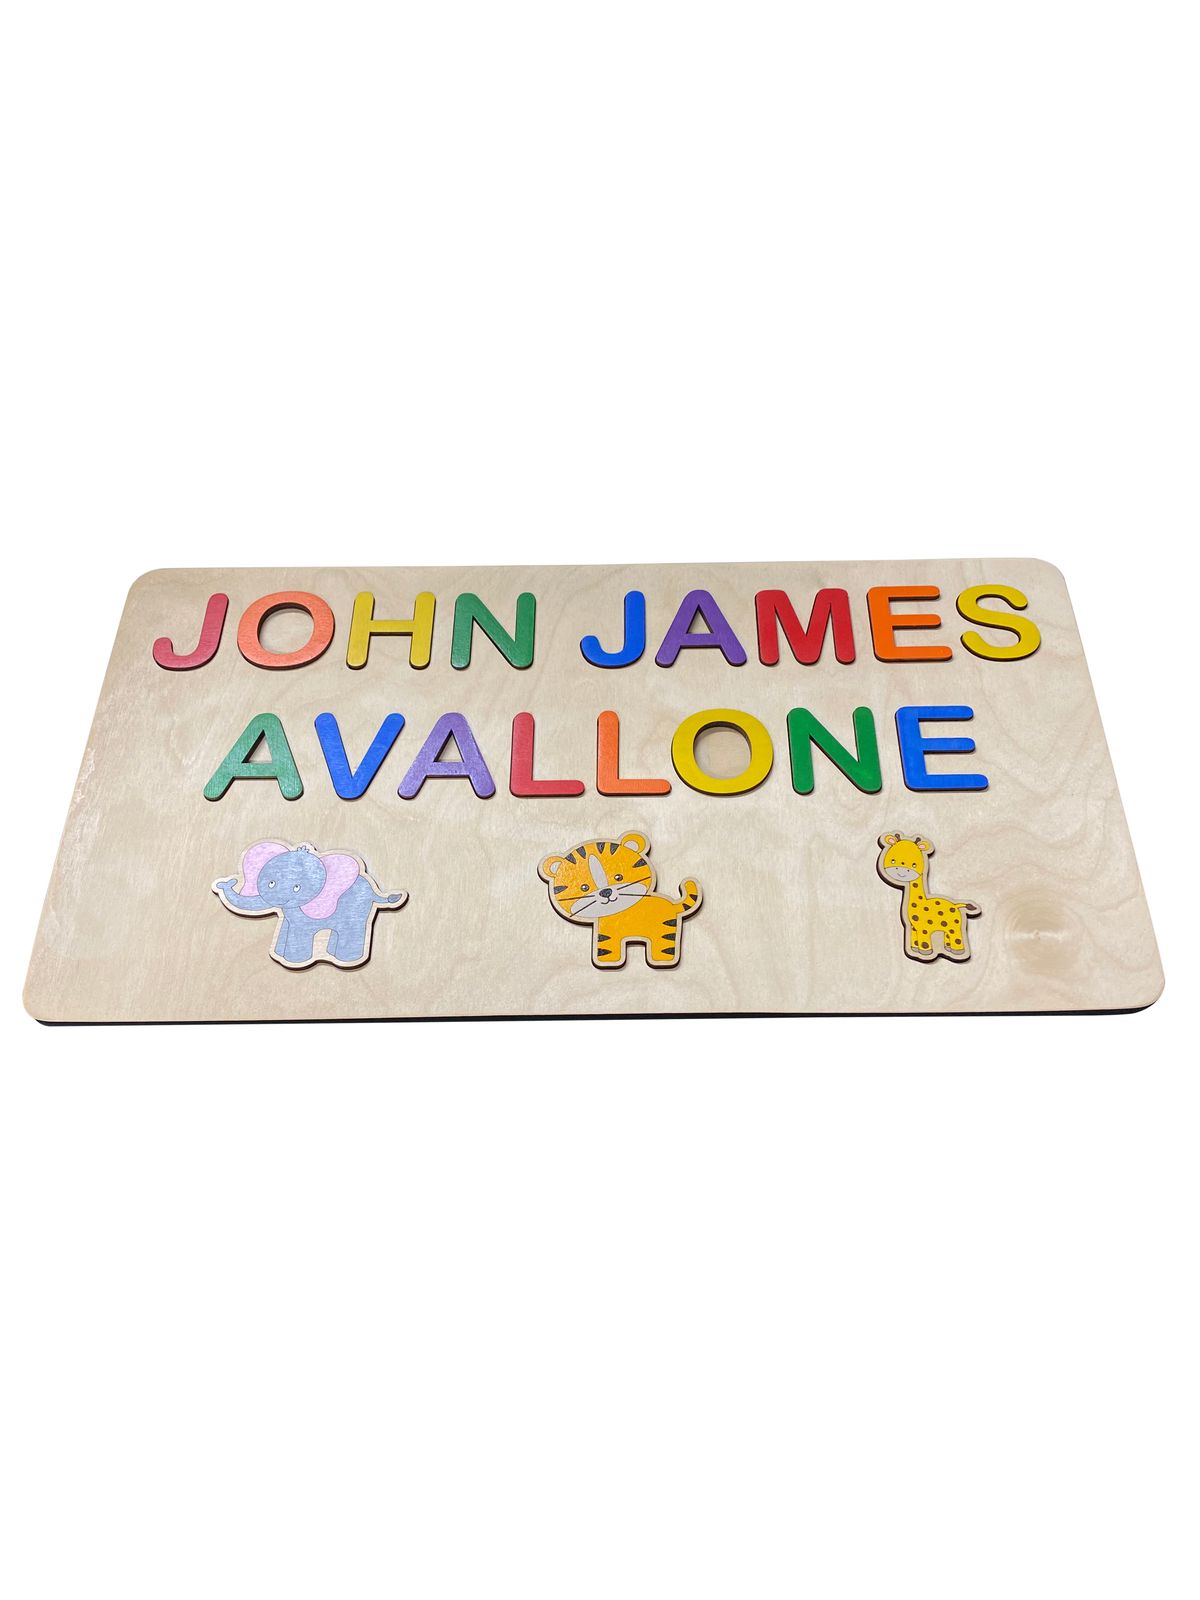 Customized 3D Name puzzle with Adorable Characters - BirdsWoodShack